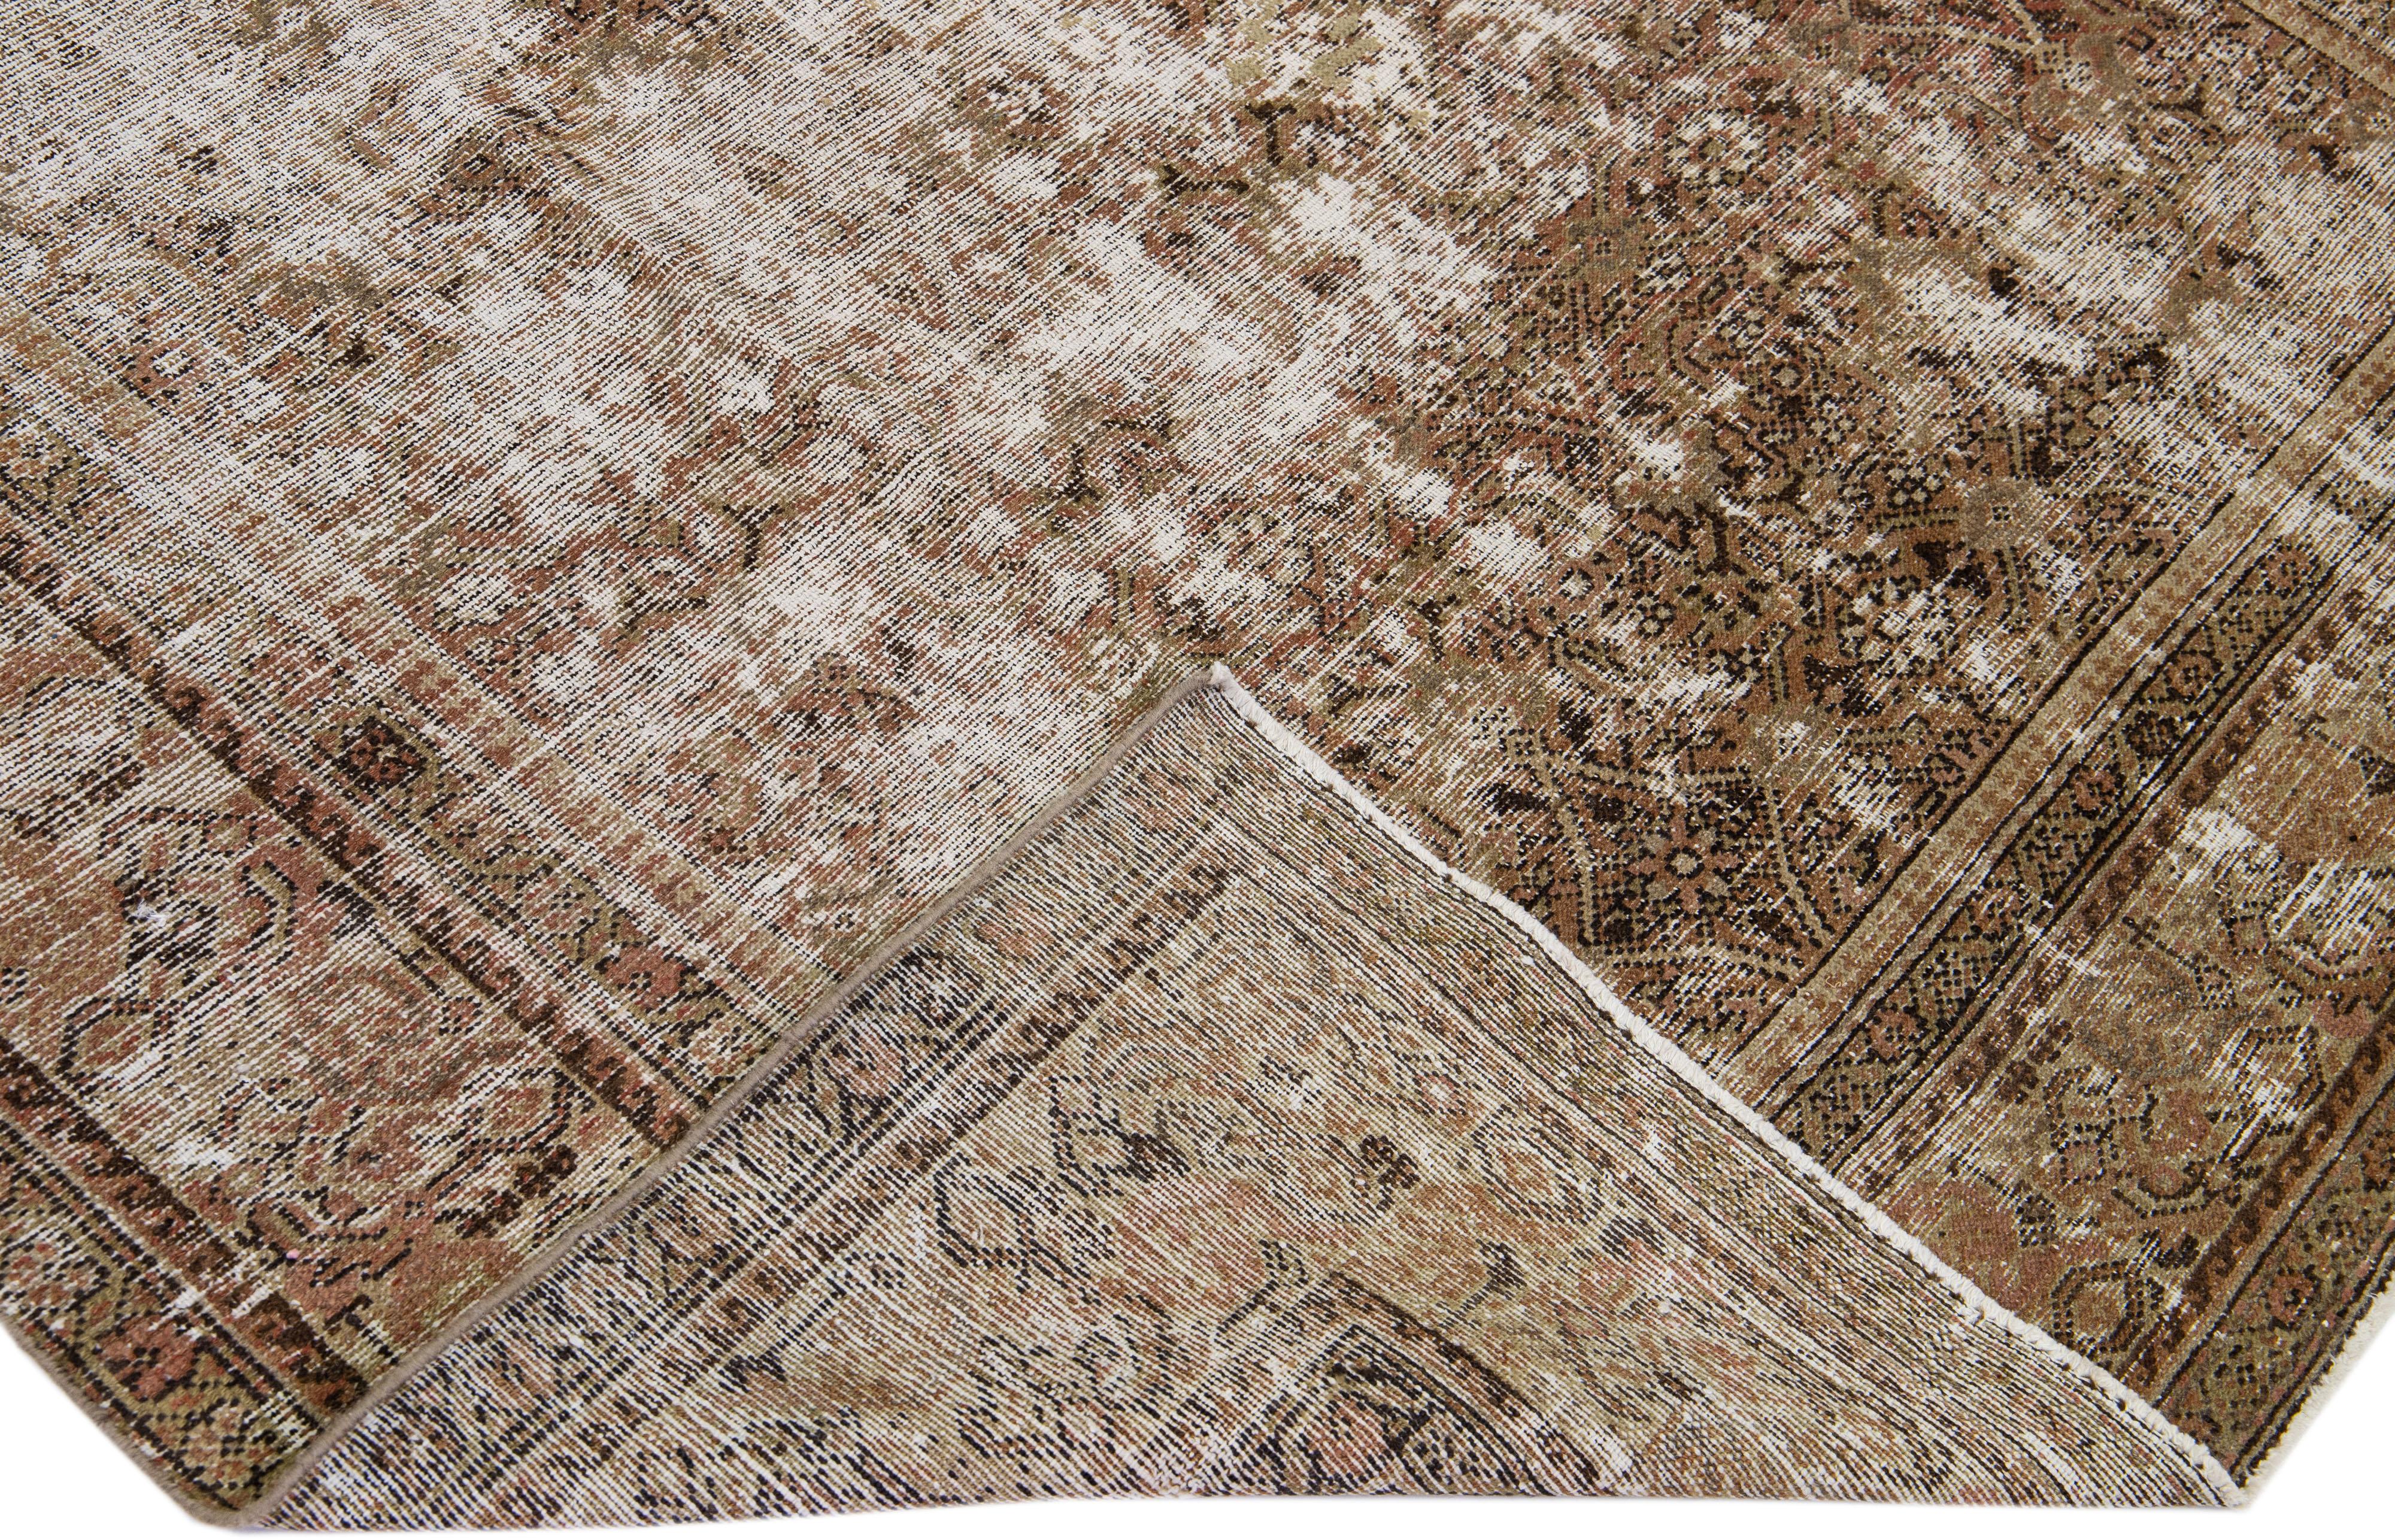 Beautiful antique Hamadan hand-knotted wool rug with a beige field. This Persian piece has brown and blue accents in a gorgeous all-over floral pattern design.

This rug measures: 6' x 16'5